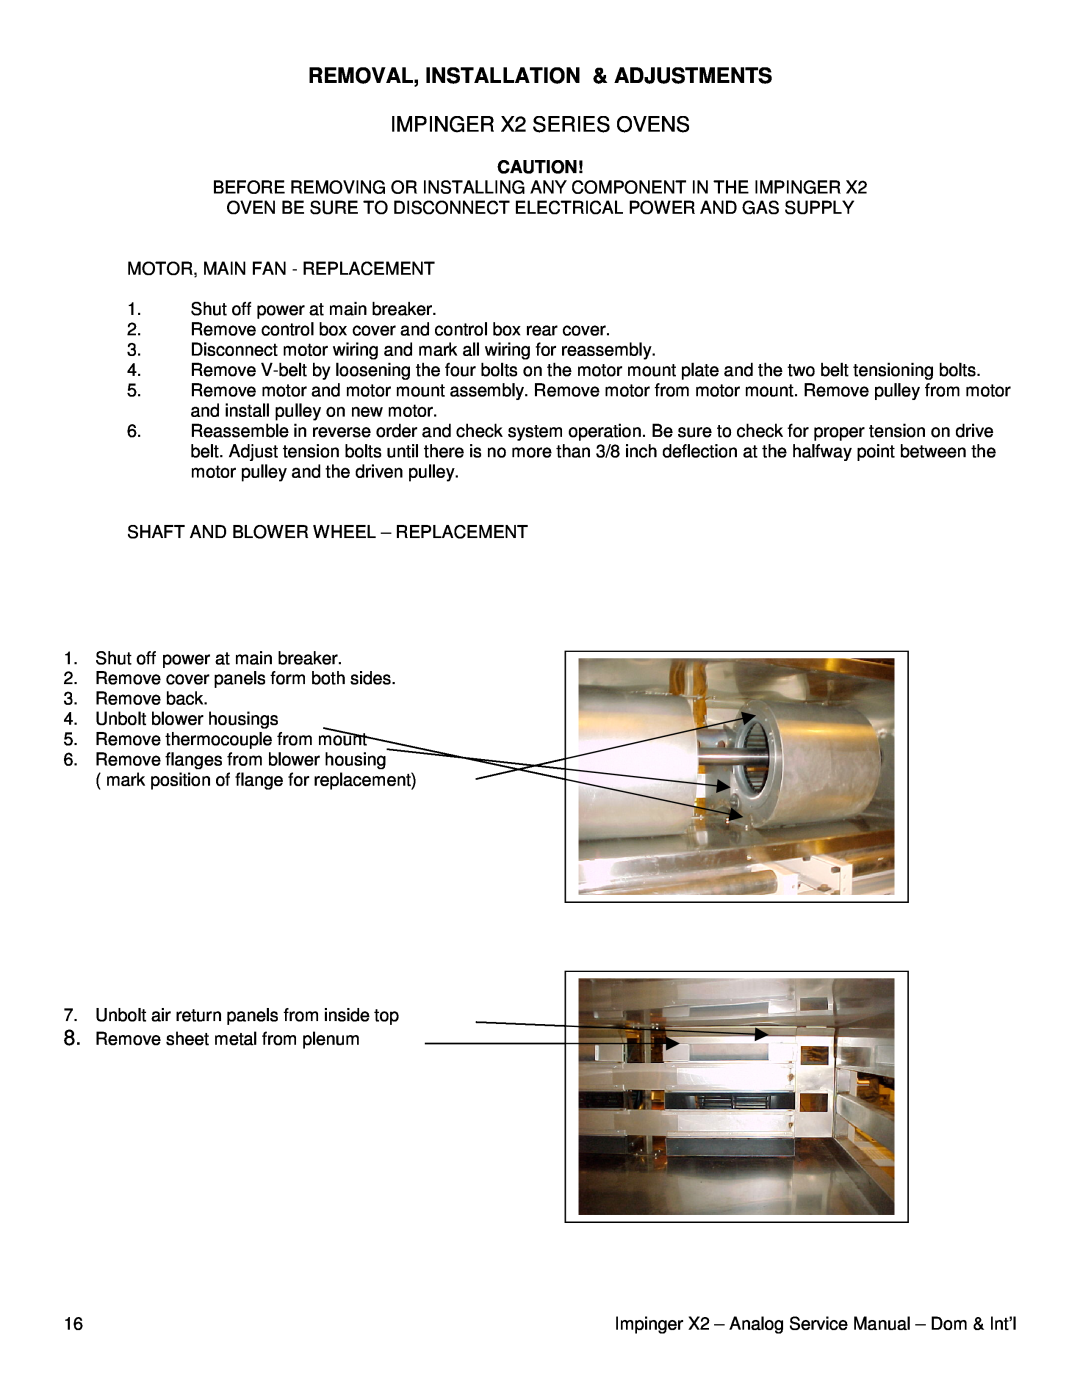 Lincoln 3262, 3270-2, 3240-2 service manual IMPINGER X2 SERIES OVENS, Removal, Installation & Adjustments 